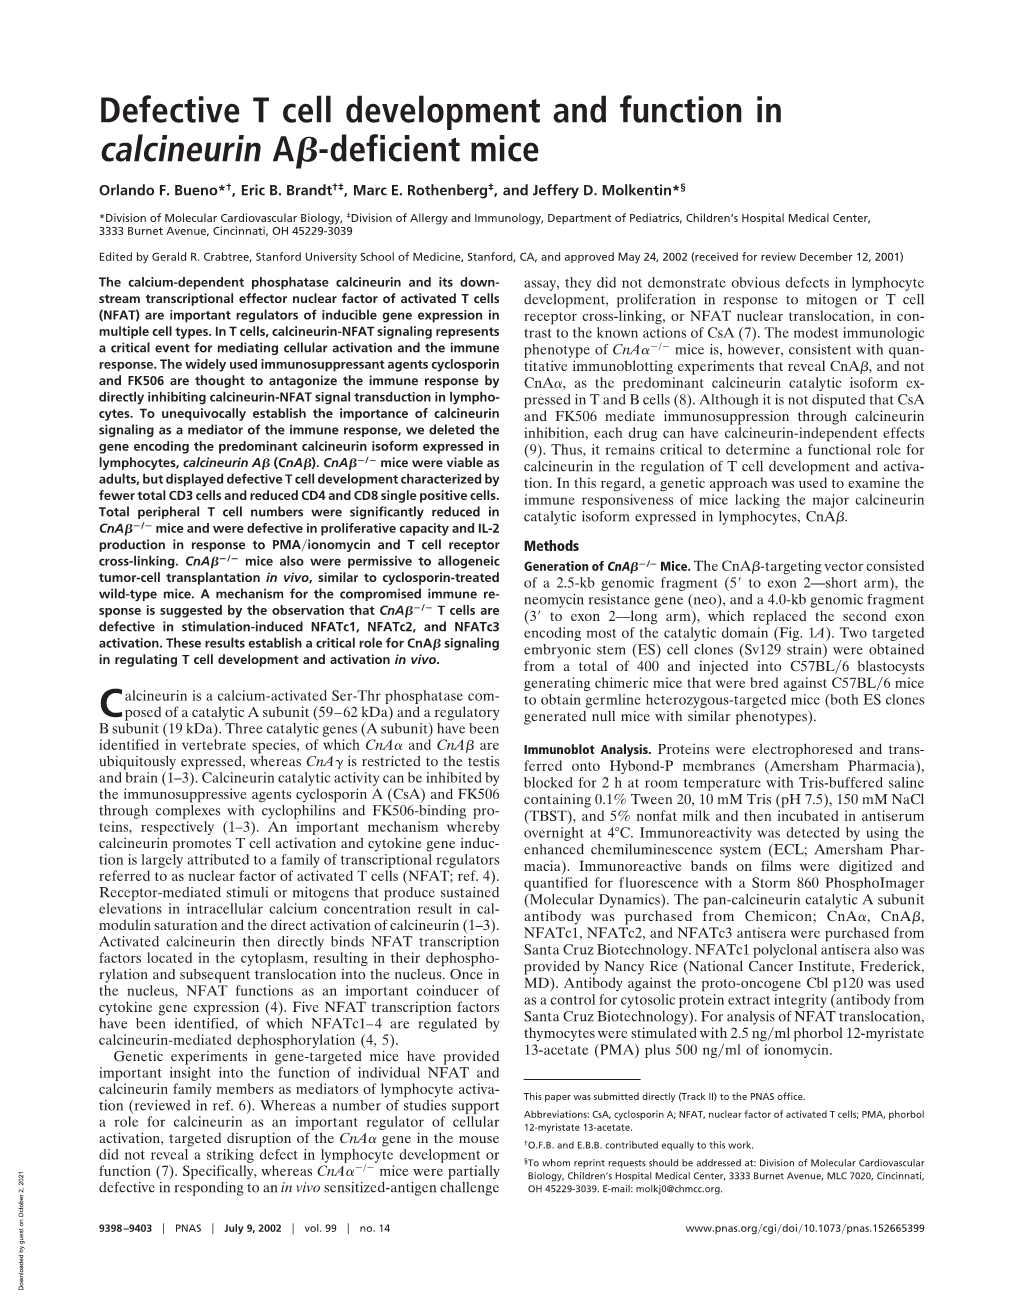 Defective T Cell Development and Function in Calcineurin a -Deficient